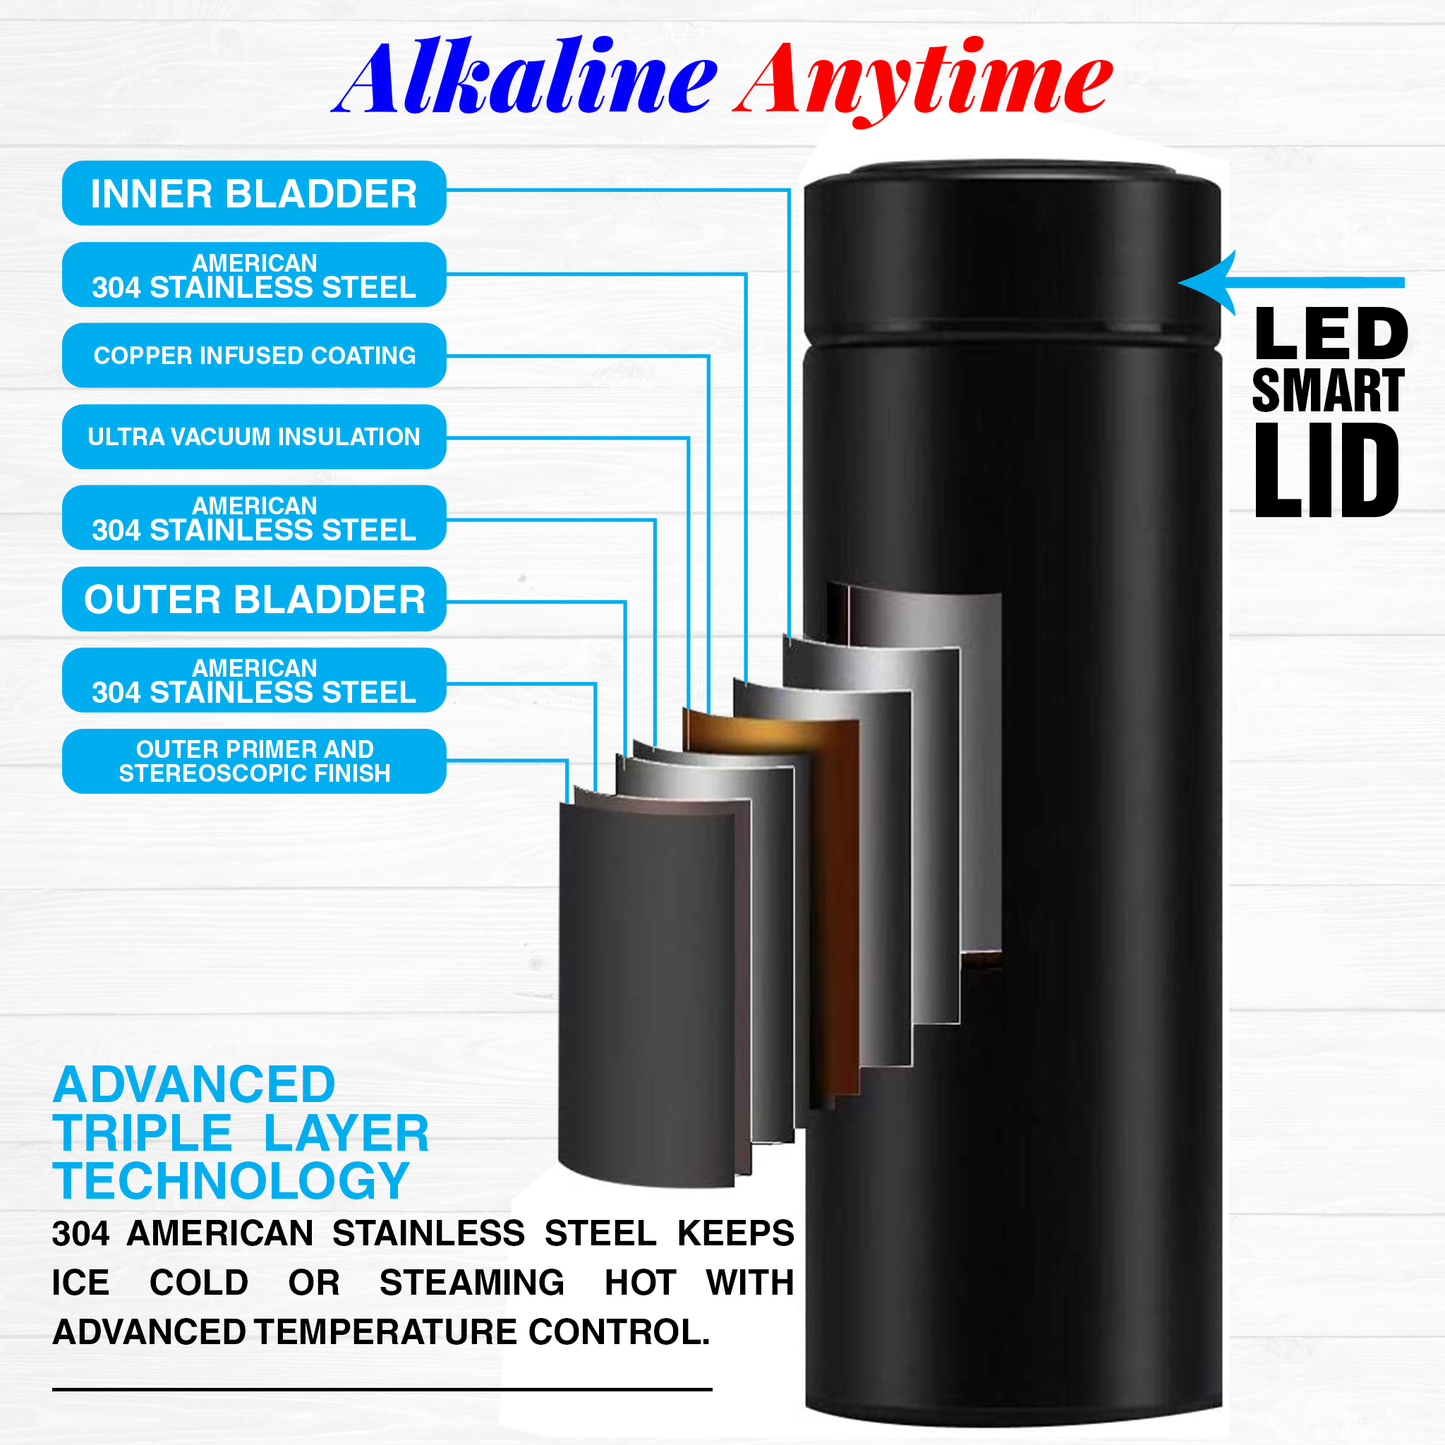 Executive Water Bottle- 2 Lids (LED Display & Steel Lid) & 3 Alkaline Water Pouches - Alkaline Anytime